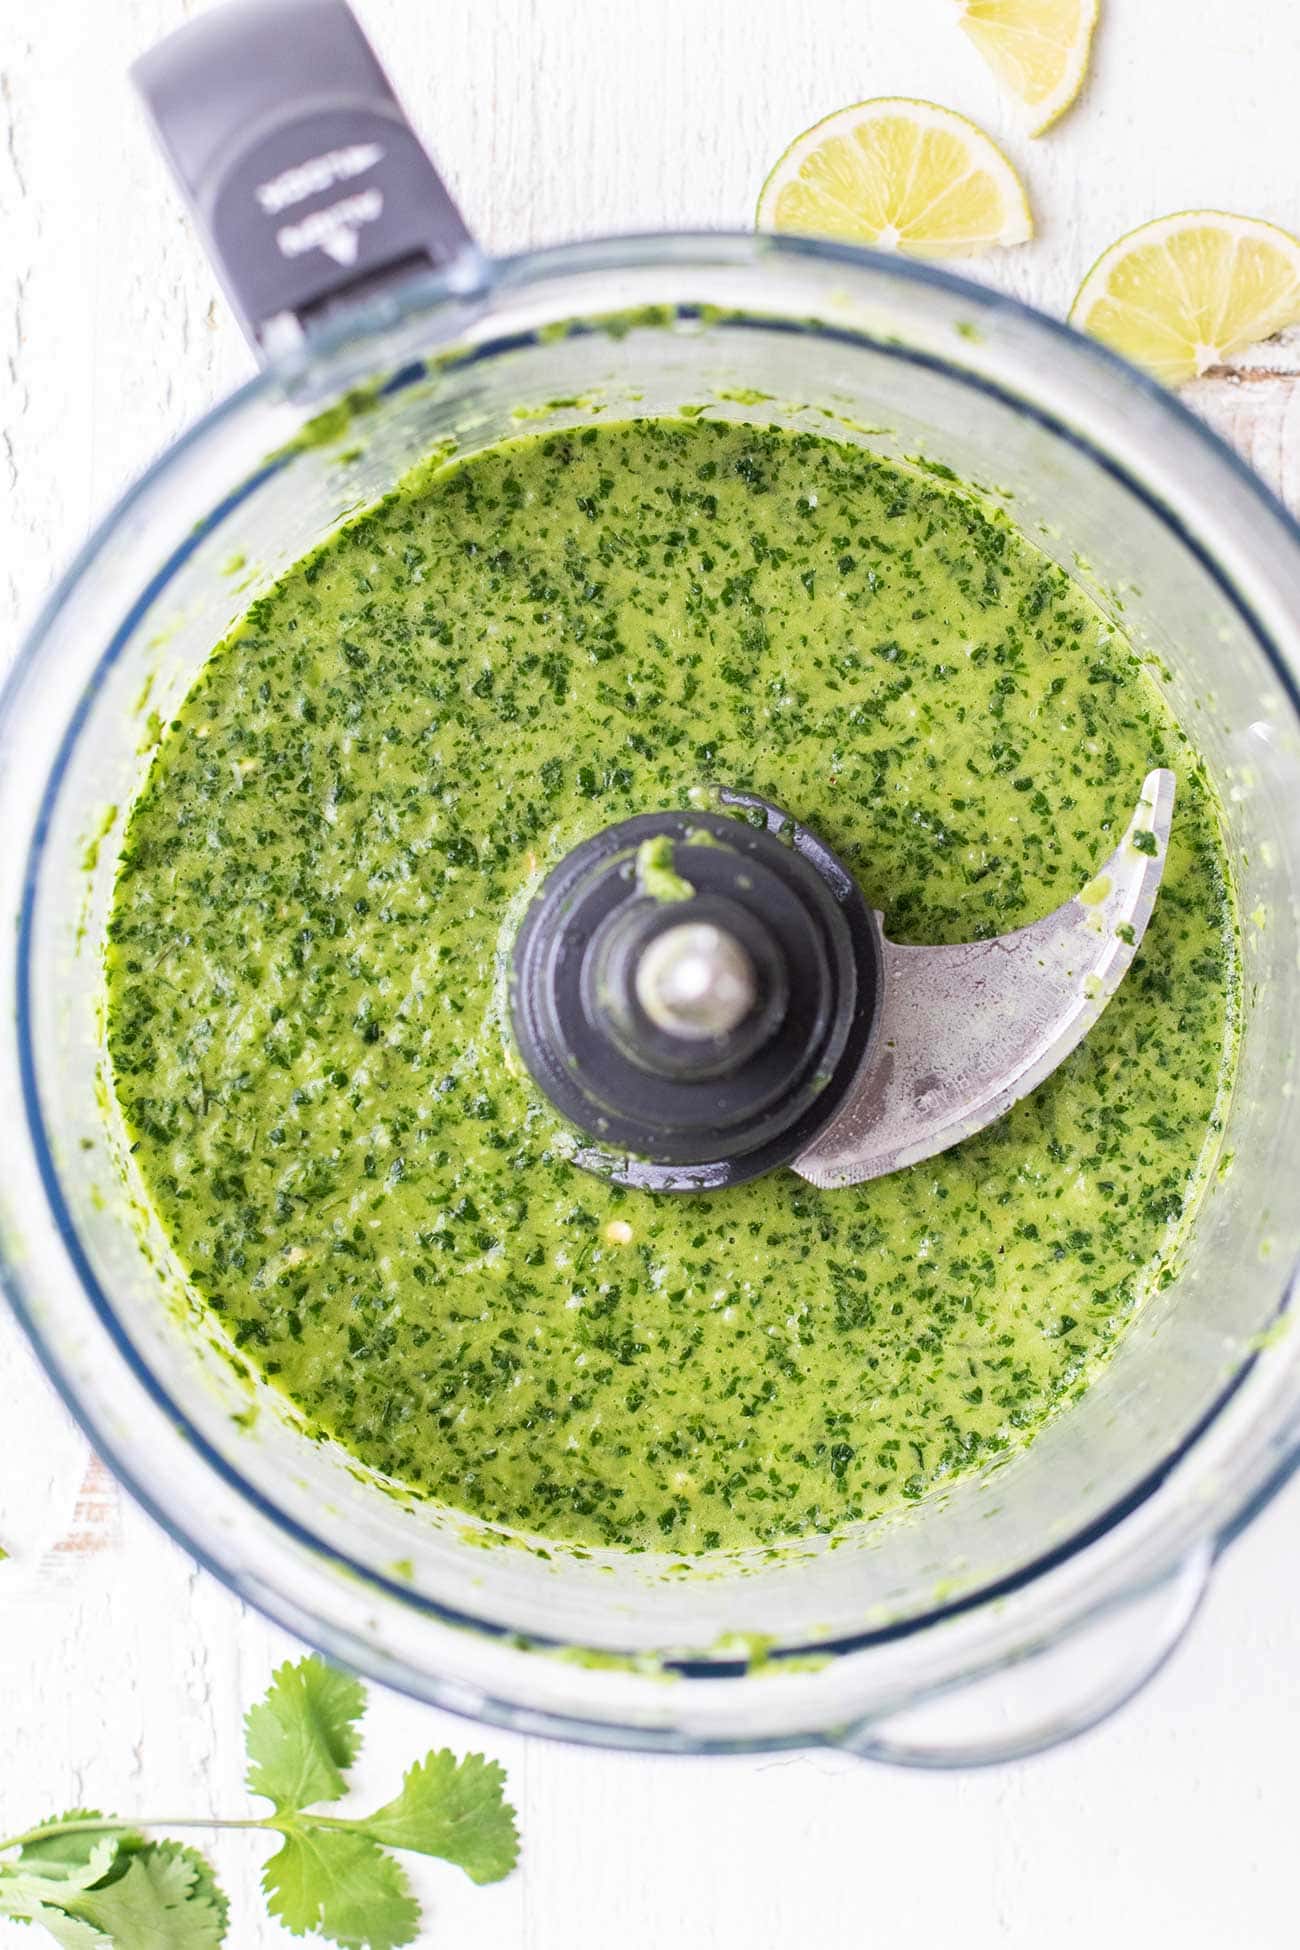 The texture of mojo verde after olive oil is blended into the mixture.